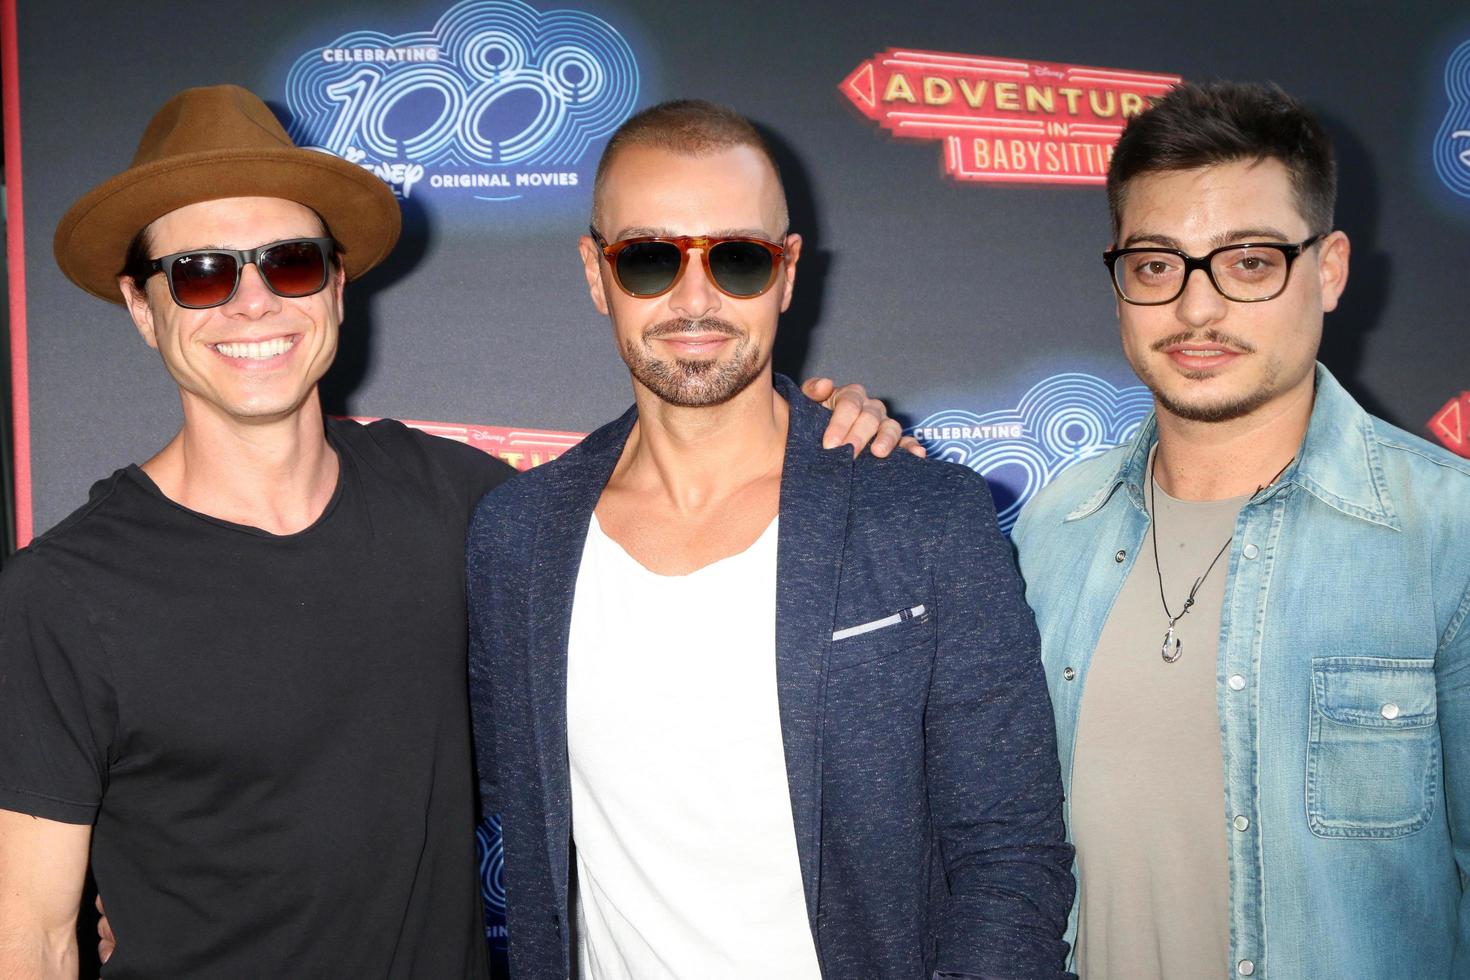 LOS ANGELES, JUN 23 - Matthew Lawrence, Joe Lawrence, Andrew Lawrence at the 100th DCOM Adventures In Babysitting LA Premiere Screening at the Directors Guild of America on June 23, 2016 in Los Angeles, CA photo